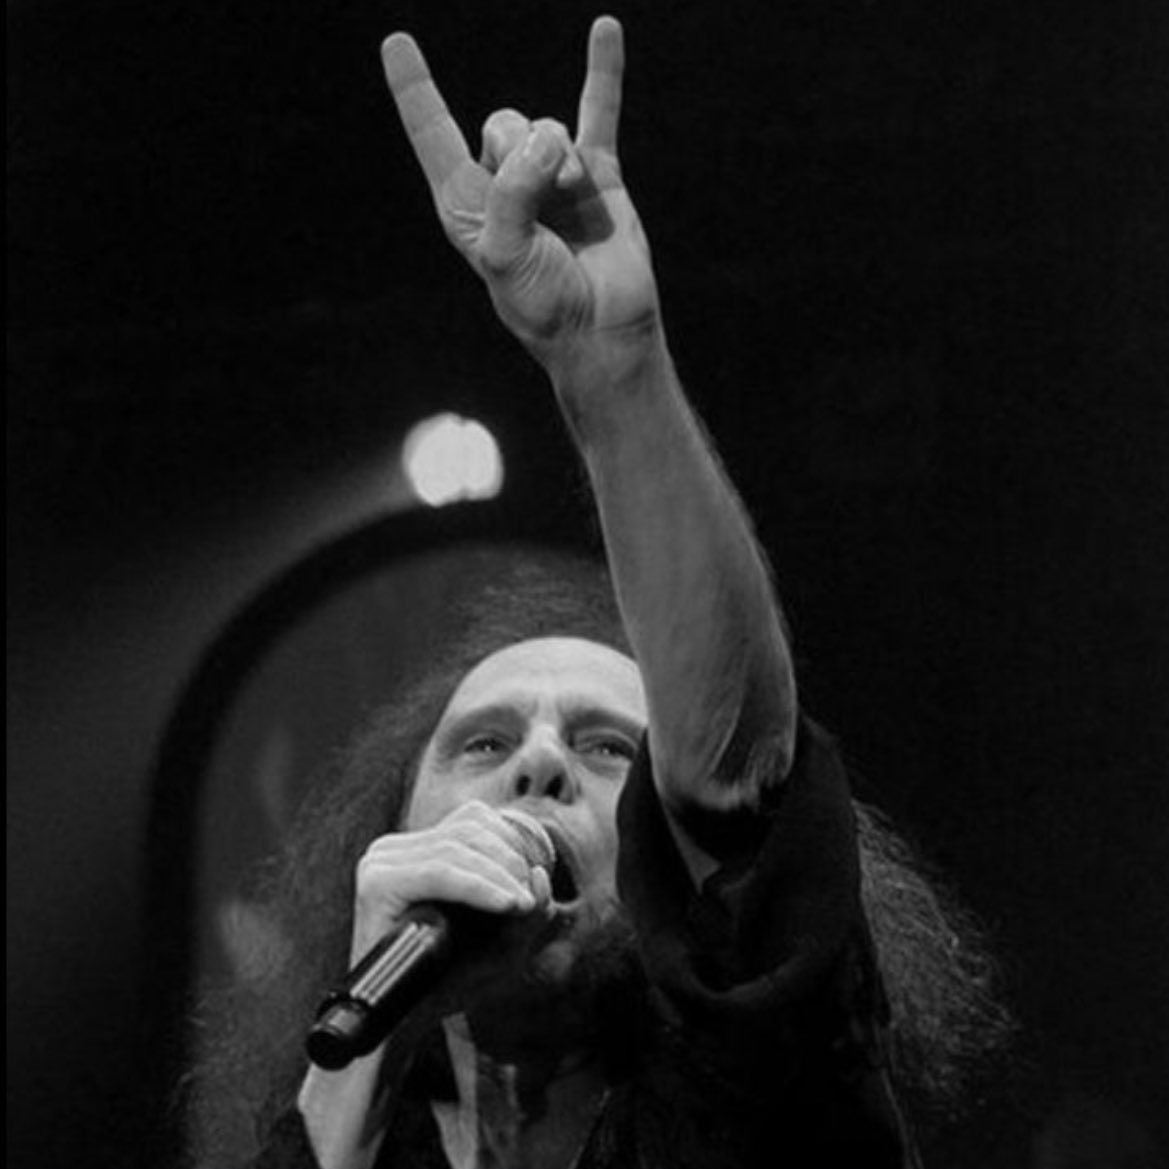 “REPOST” if you love Ronnie James DIO